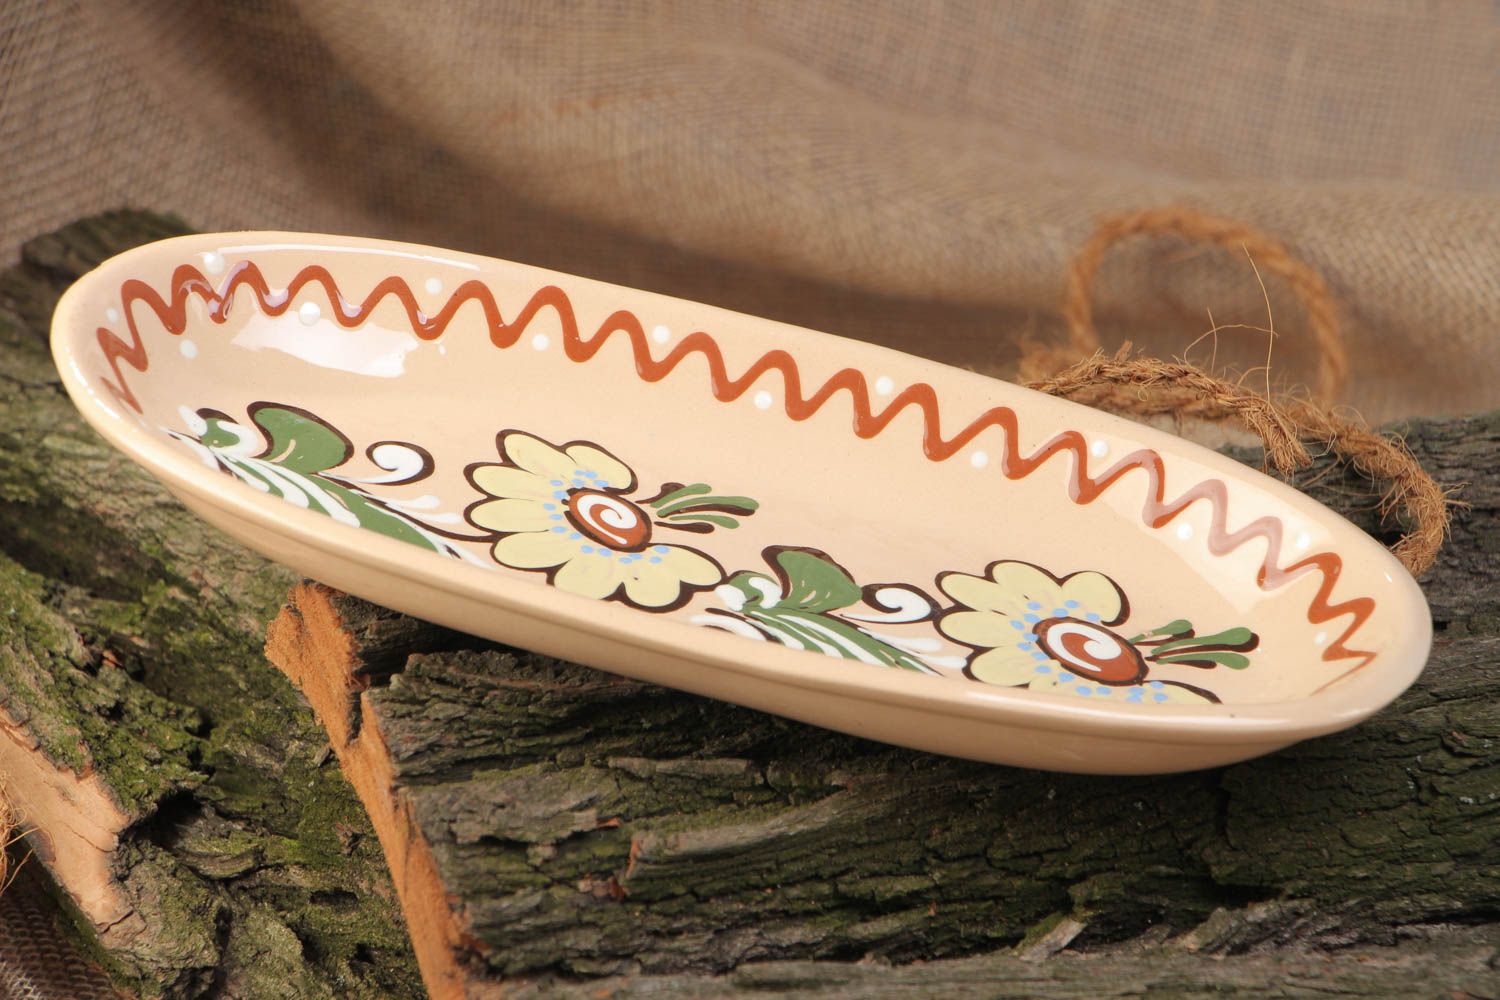 Handmade decorative ceramic long plate ornamented with colorful glaze for fish photo 1